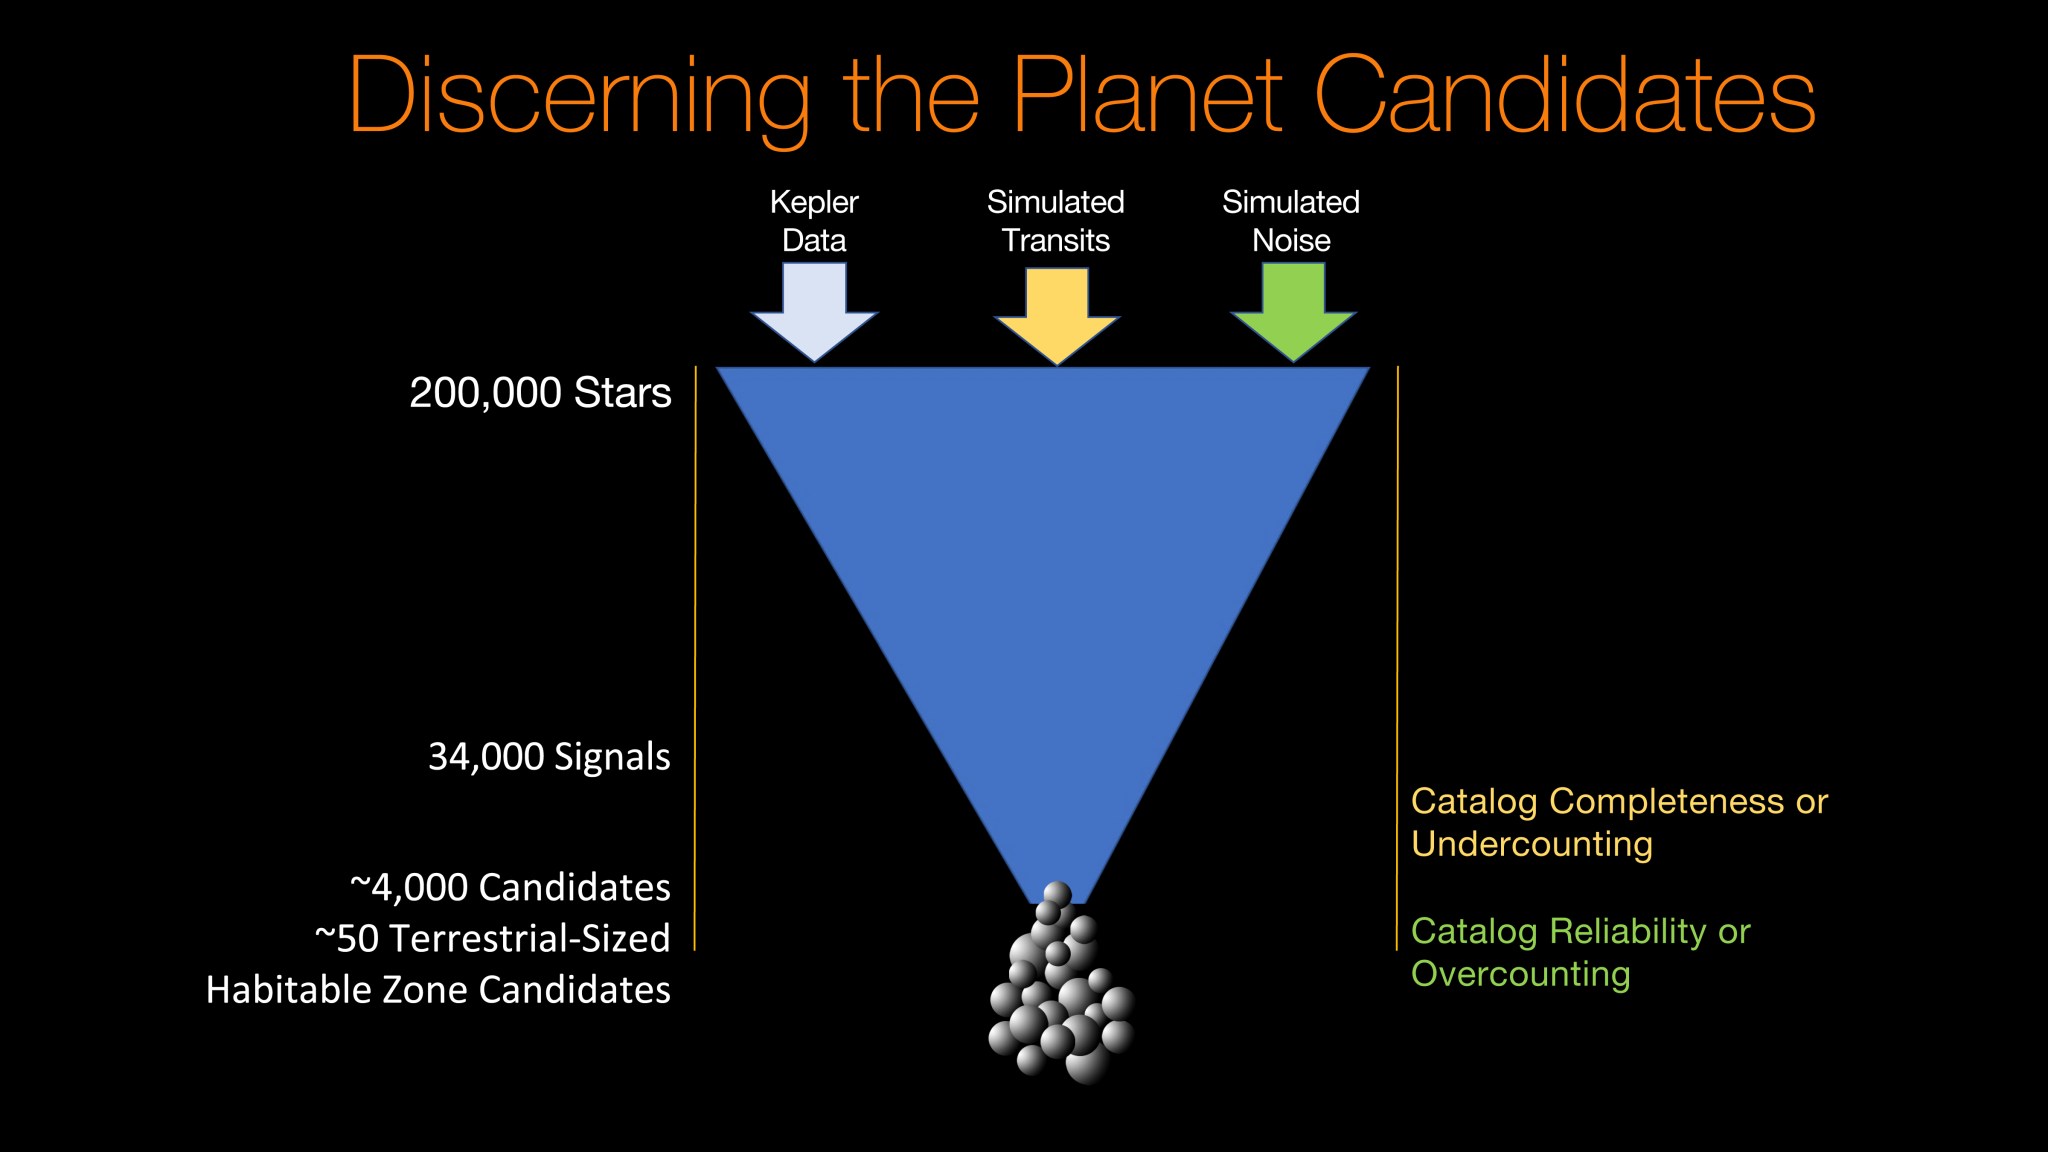 Discerning the Planet Candidates